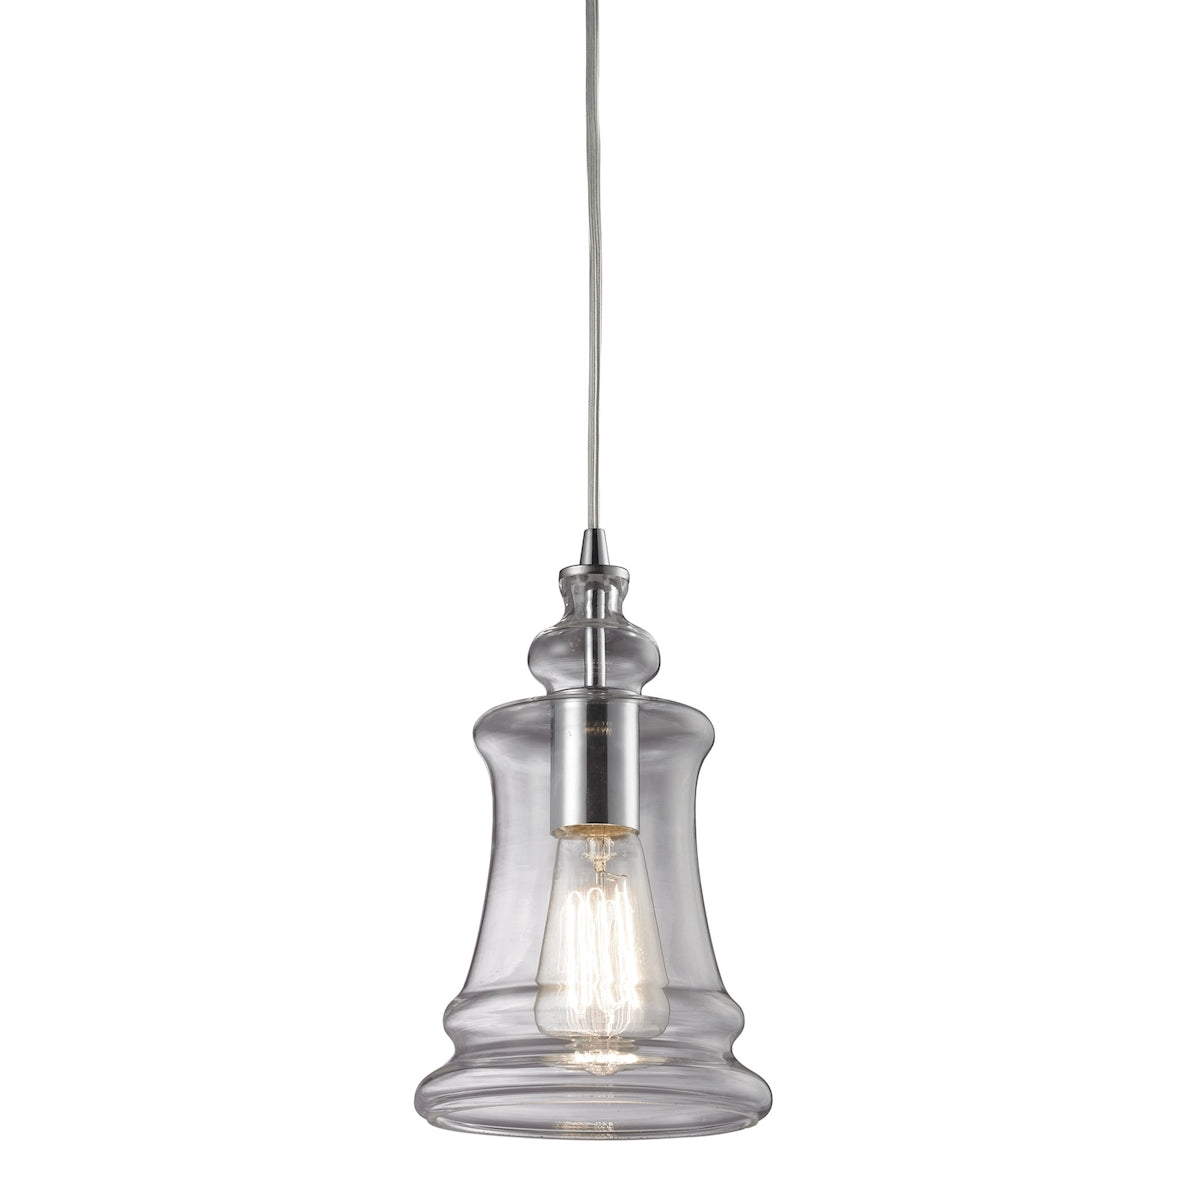 ELK Lighting 60052-1 - Menlow Park 6" Wide 1 Light Mini Pendant in Polished Chrome with Smoked Glass